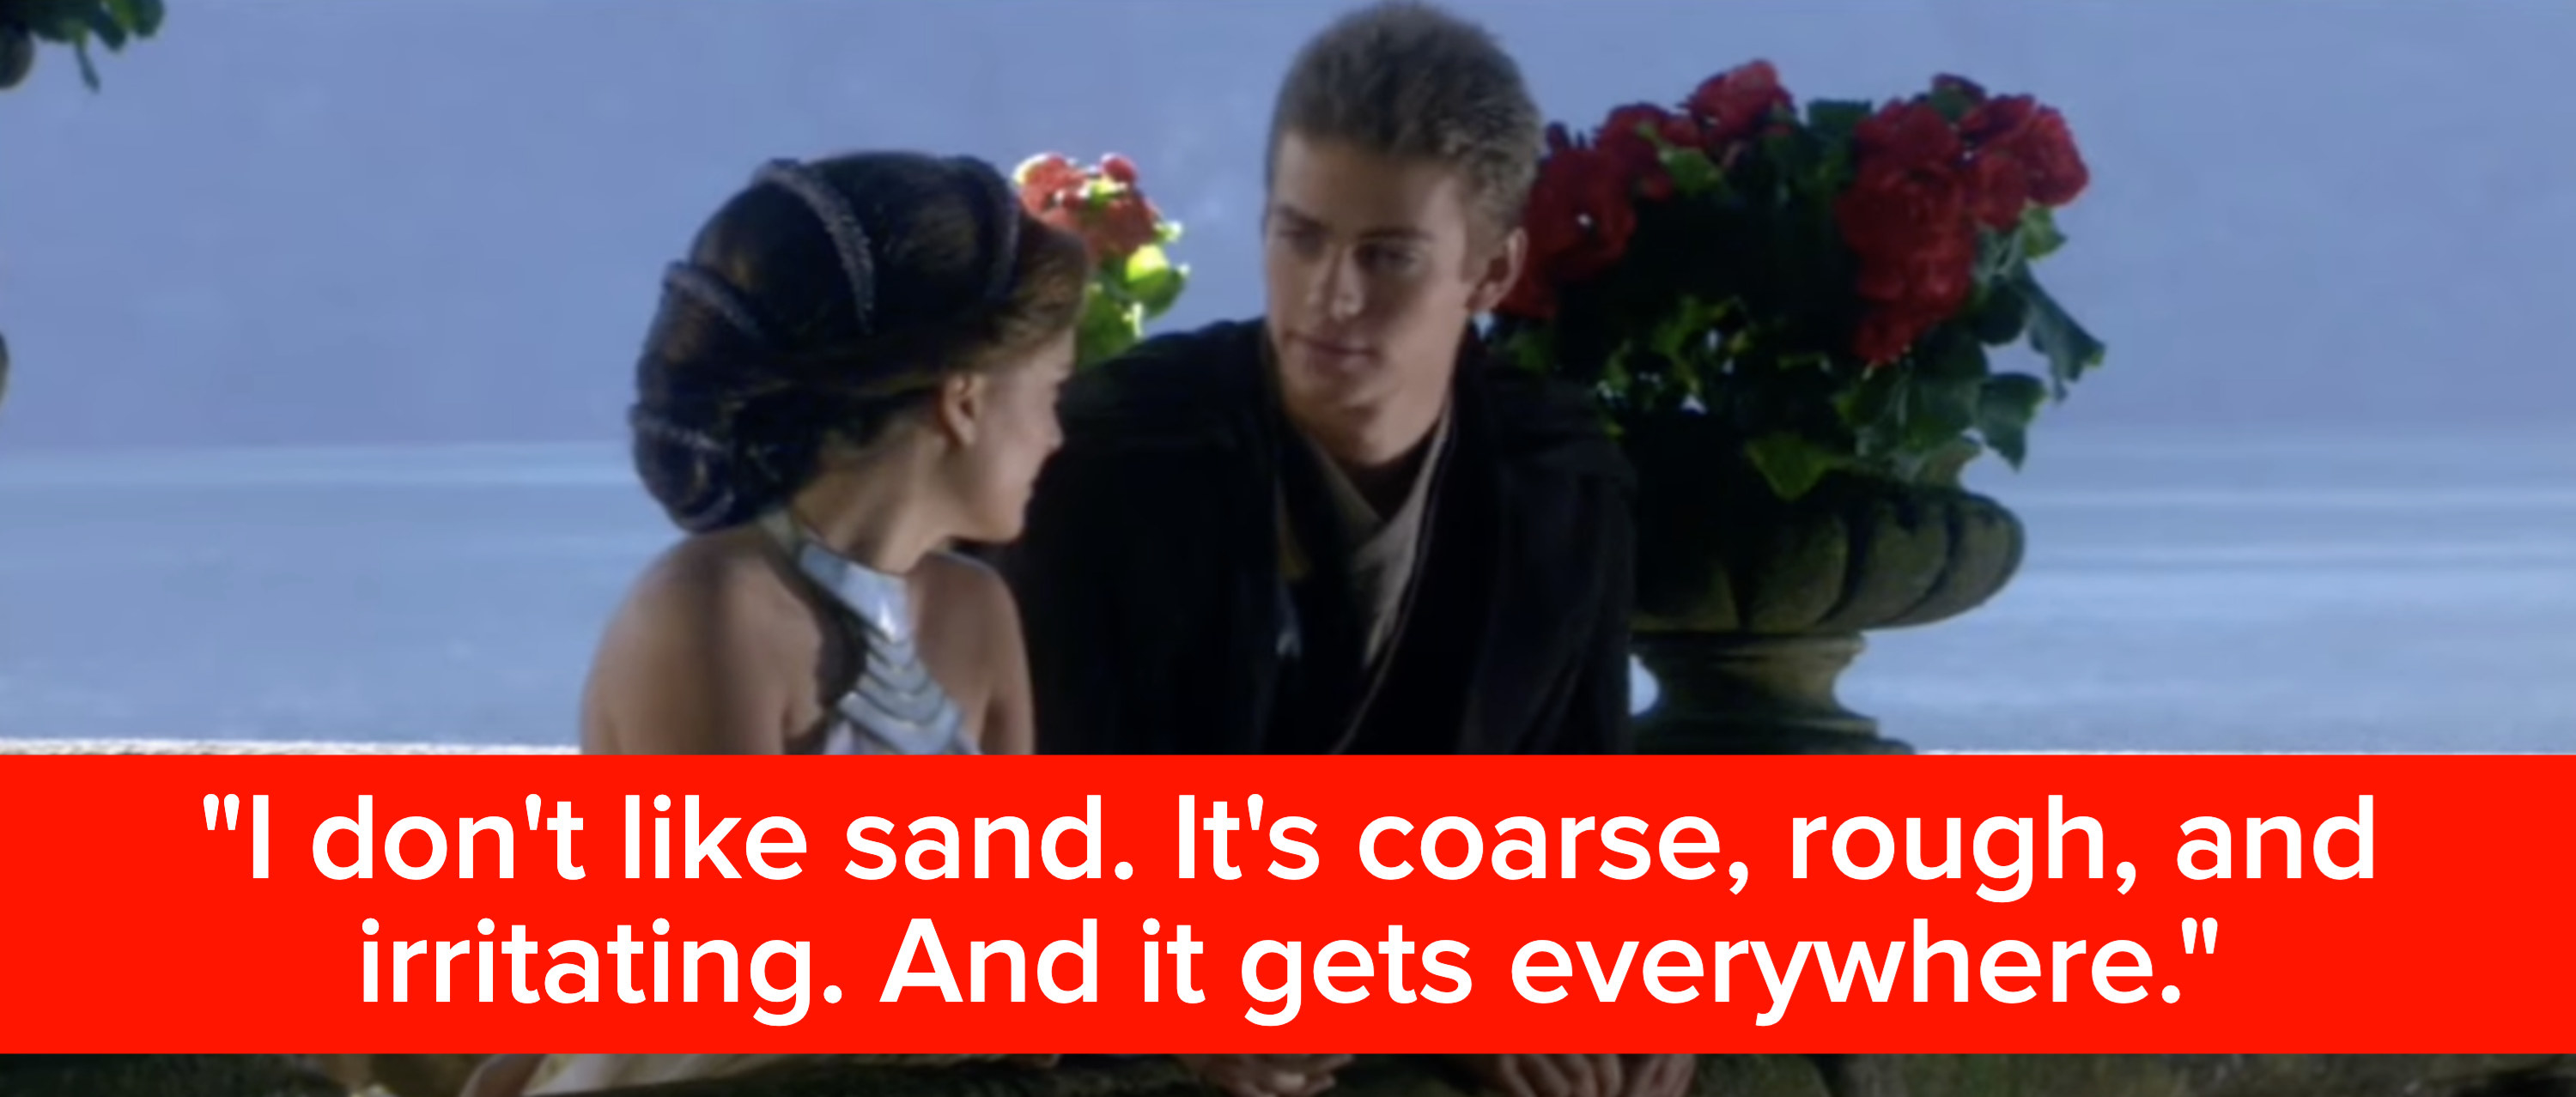 Anakin says, &quot;I don&#x27;t like sand it&#x27;s coarse, rough, and irritating, and it gets everywhere&quot;